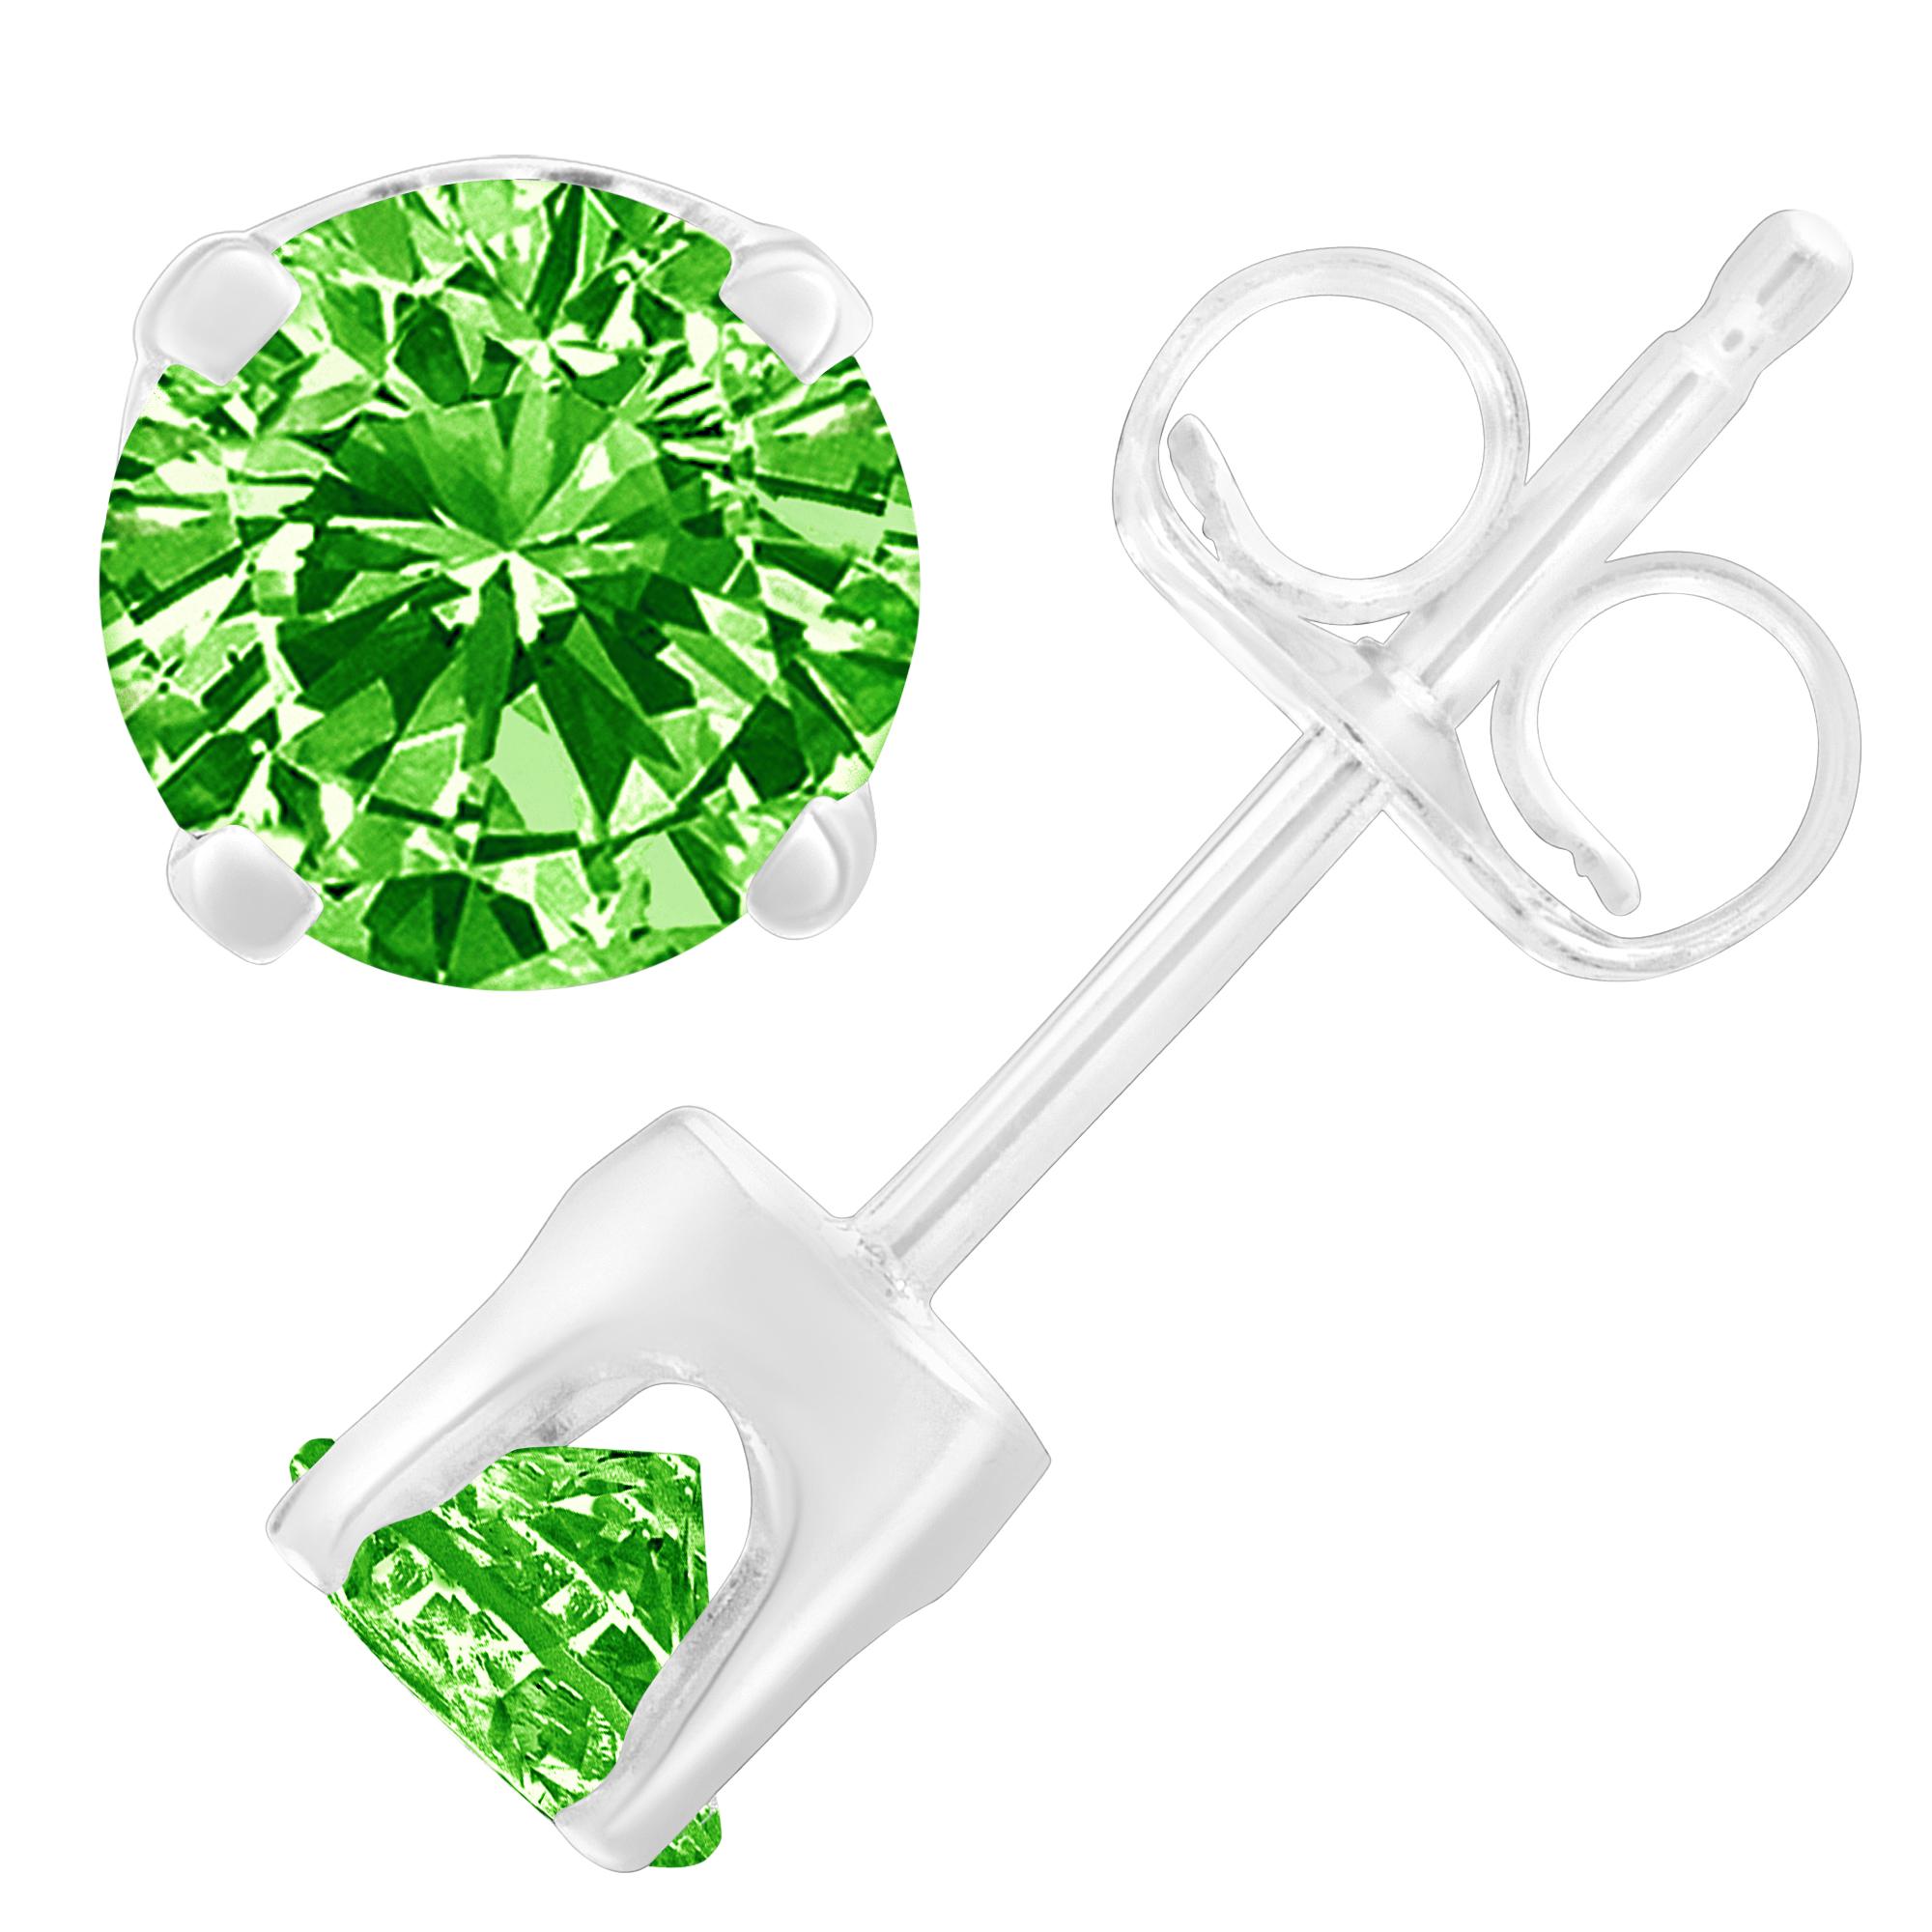 With a simple and classic design, these solitaire stud earrings feature 1/7ct TDW of diamonds. Green, color treated, round cut diamonds in a prong setting sparkle in this design. Crafted in sterling silver, these stud earrings are perfect to wear